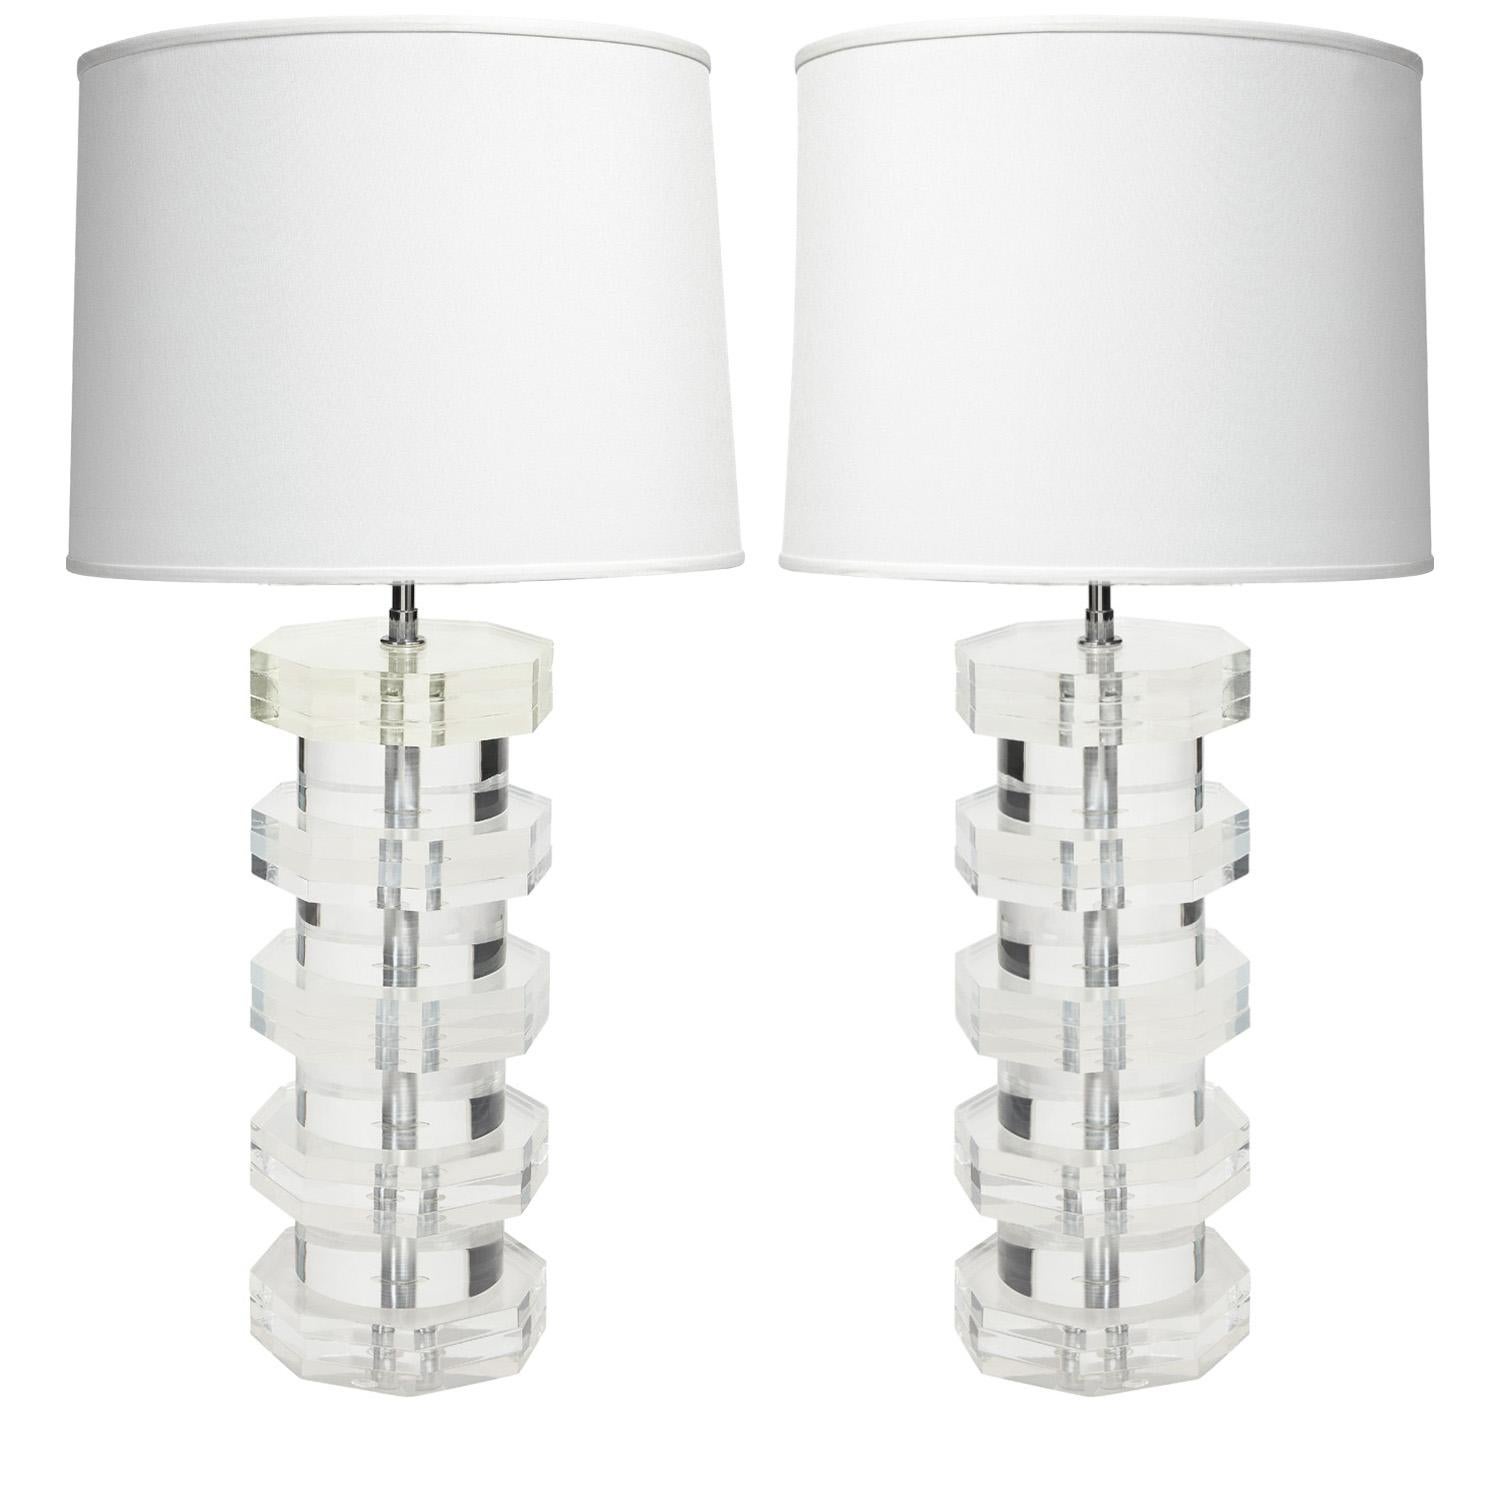 Pair of solid lucite table lamps with octagonal sections separated by cylindrical sections with chrome hardware by Karl Springer, American 1970's. As with all Springer’s pieces, these are beautifully made.  

Shade 16 inch diameter x 12 inches high